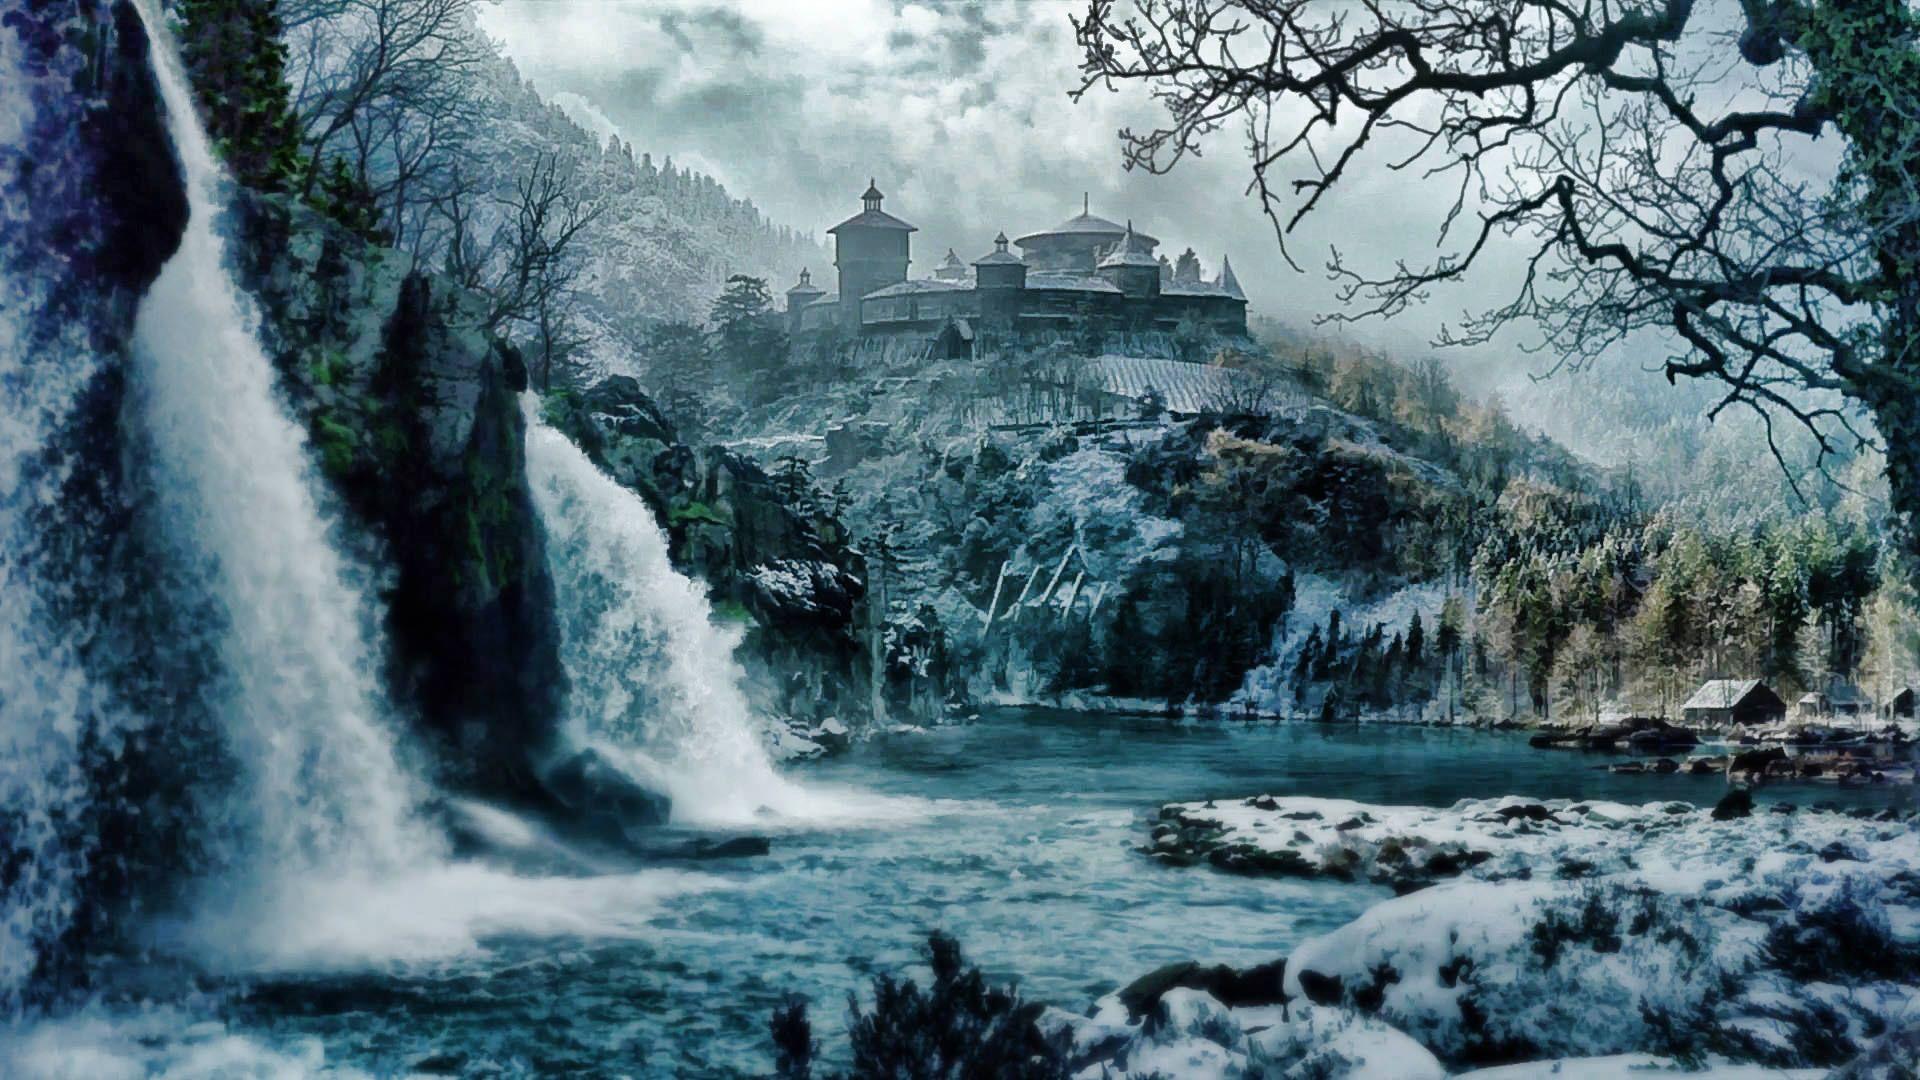 Game of Thrones Winterfell